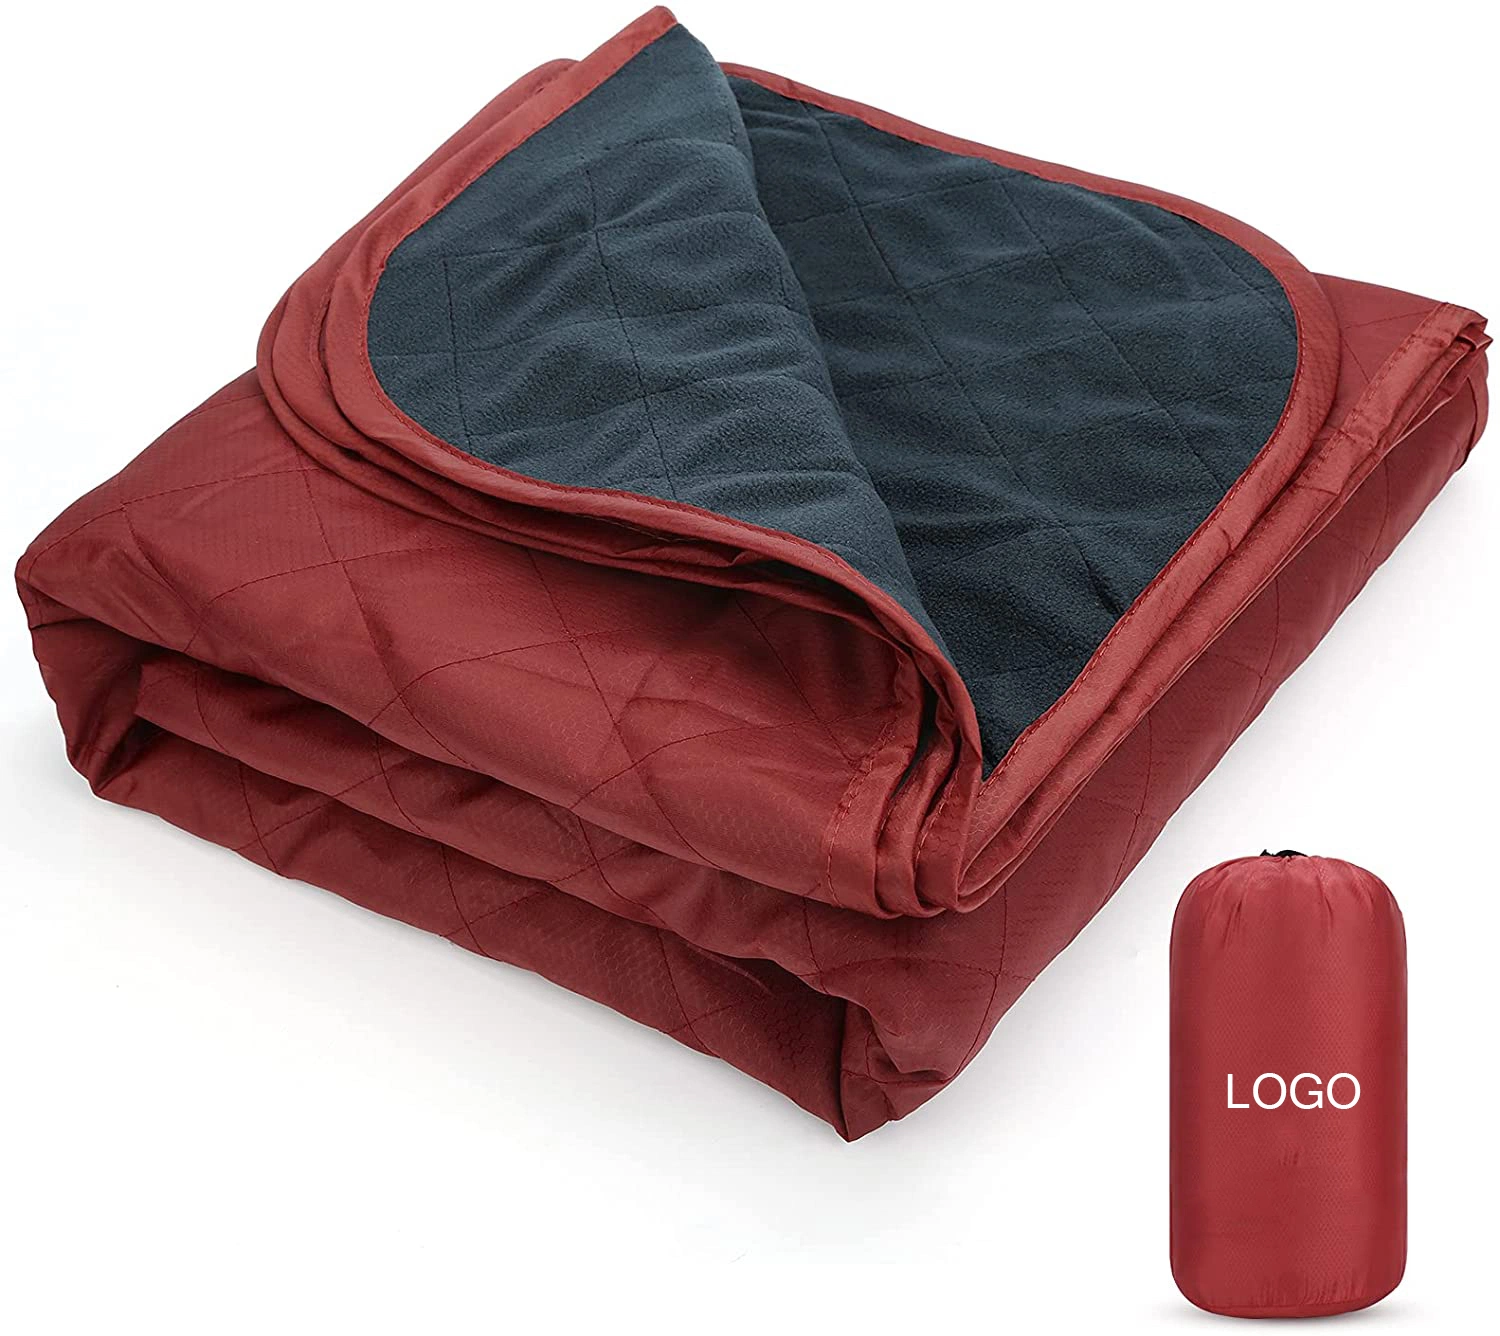 Foldable Outdoor Waterproof Camping Warm Blanket with Plush Fleece Inner Lining Picnic Blanket for Hiking